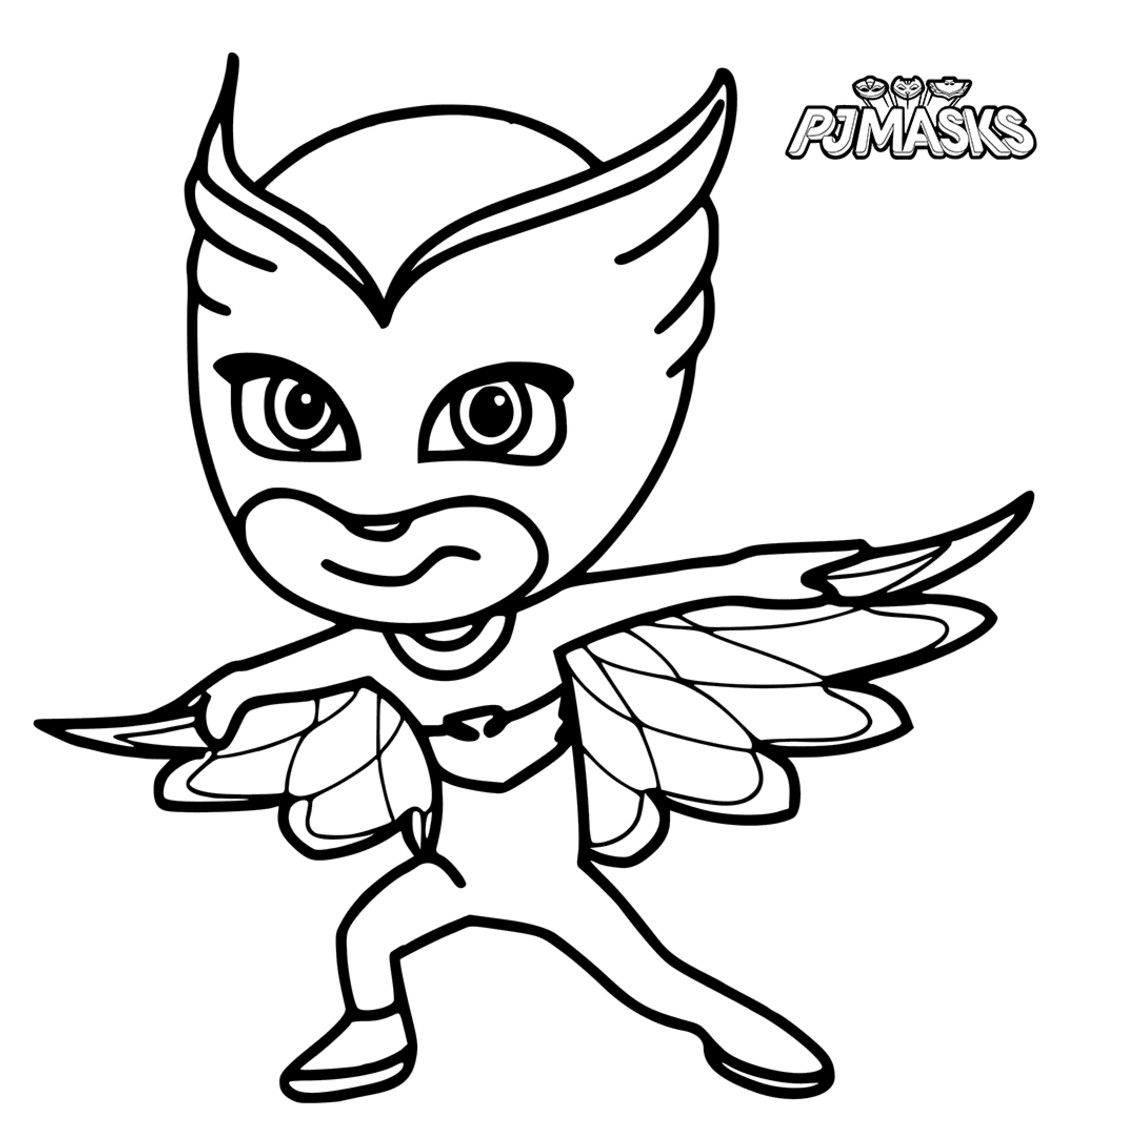 Printable Pj Mask Coloring Pages
 PJ Masks coloring pages to and print for free